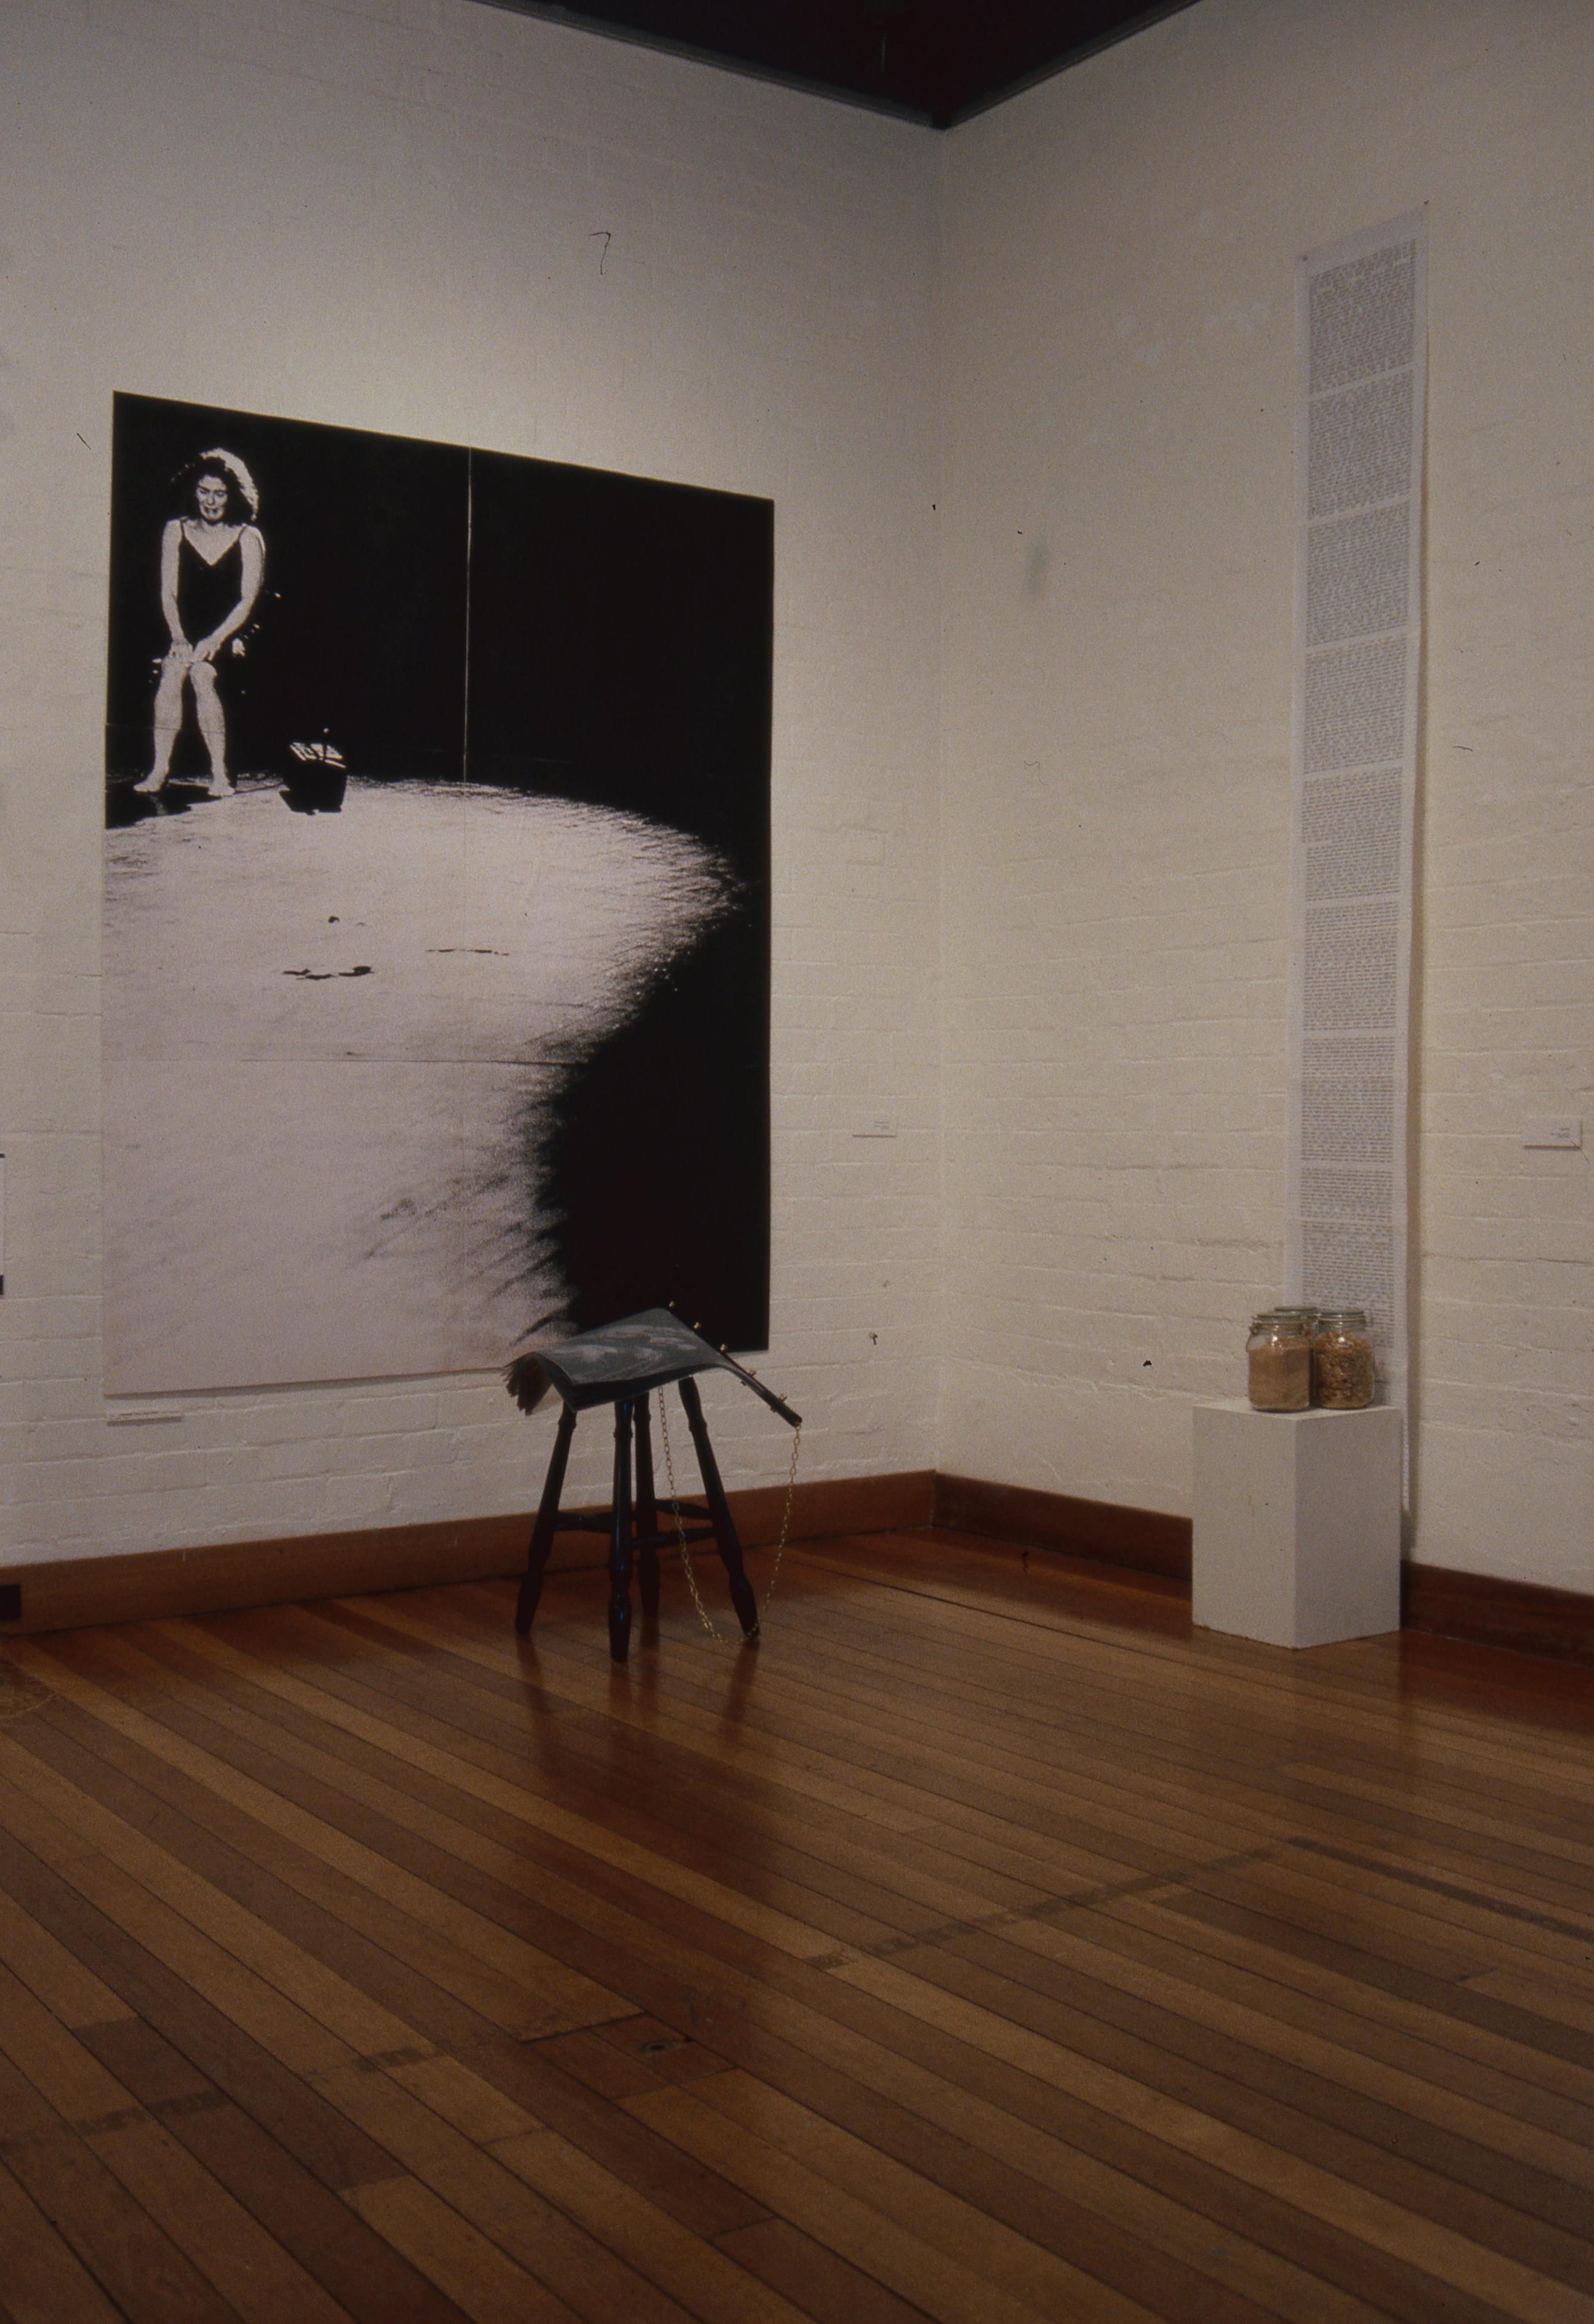 idg_archive_1994_25_years_of_performing_art_in_australia_exhibition_001_install.jpg